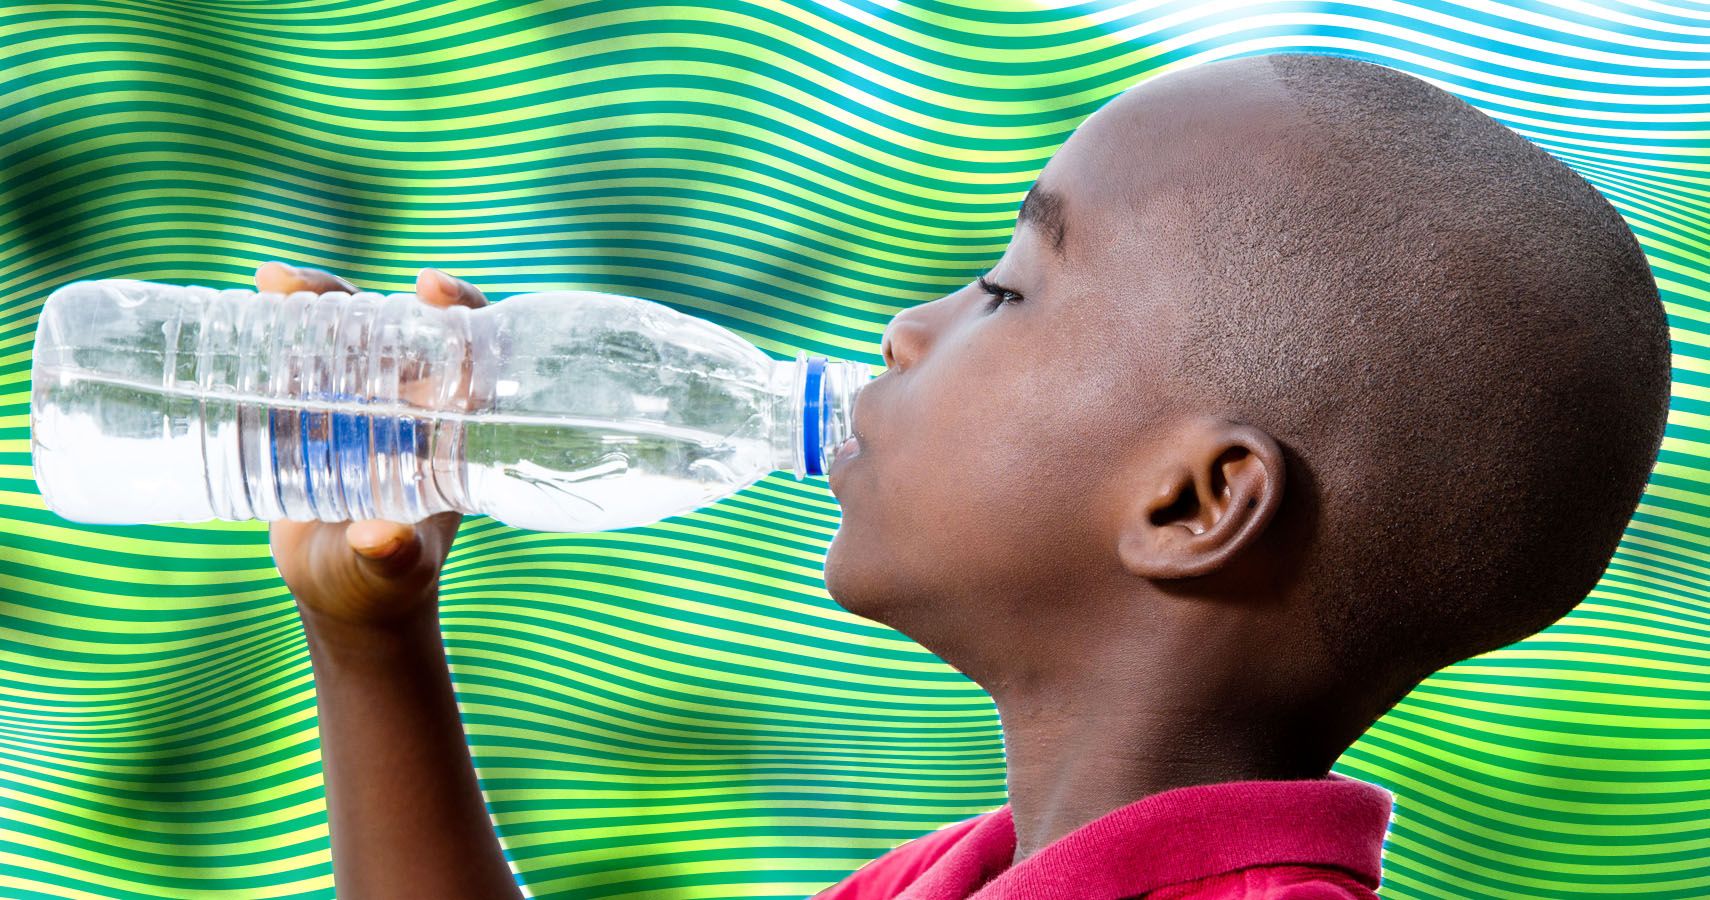 How Much Water Should A Child Drink In A Day?